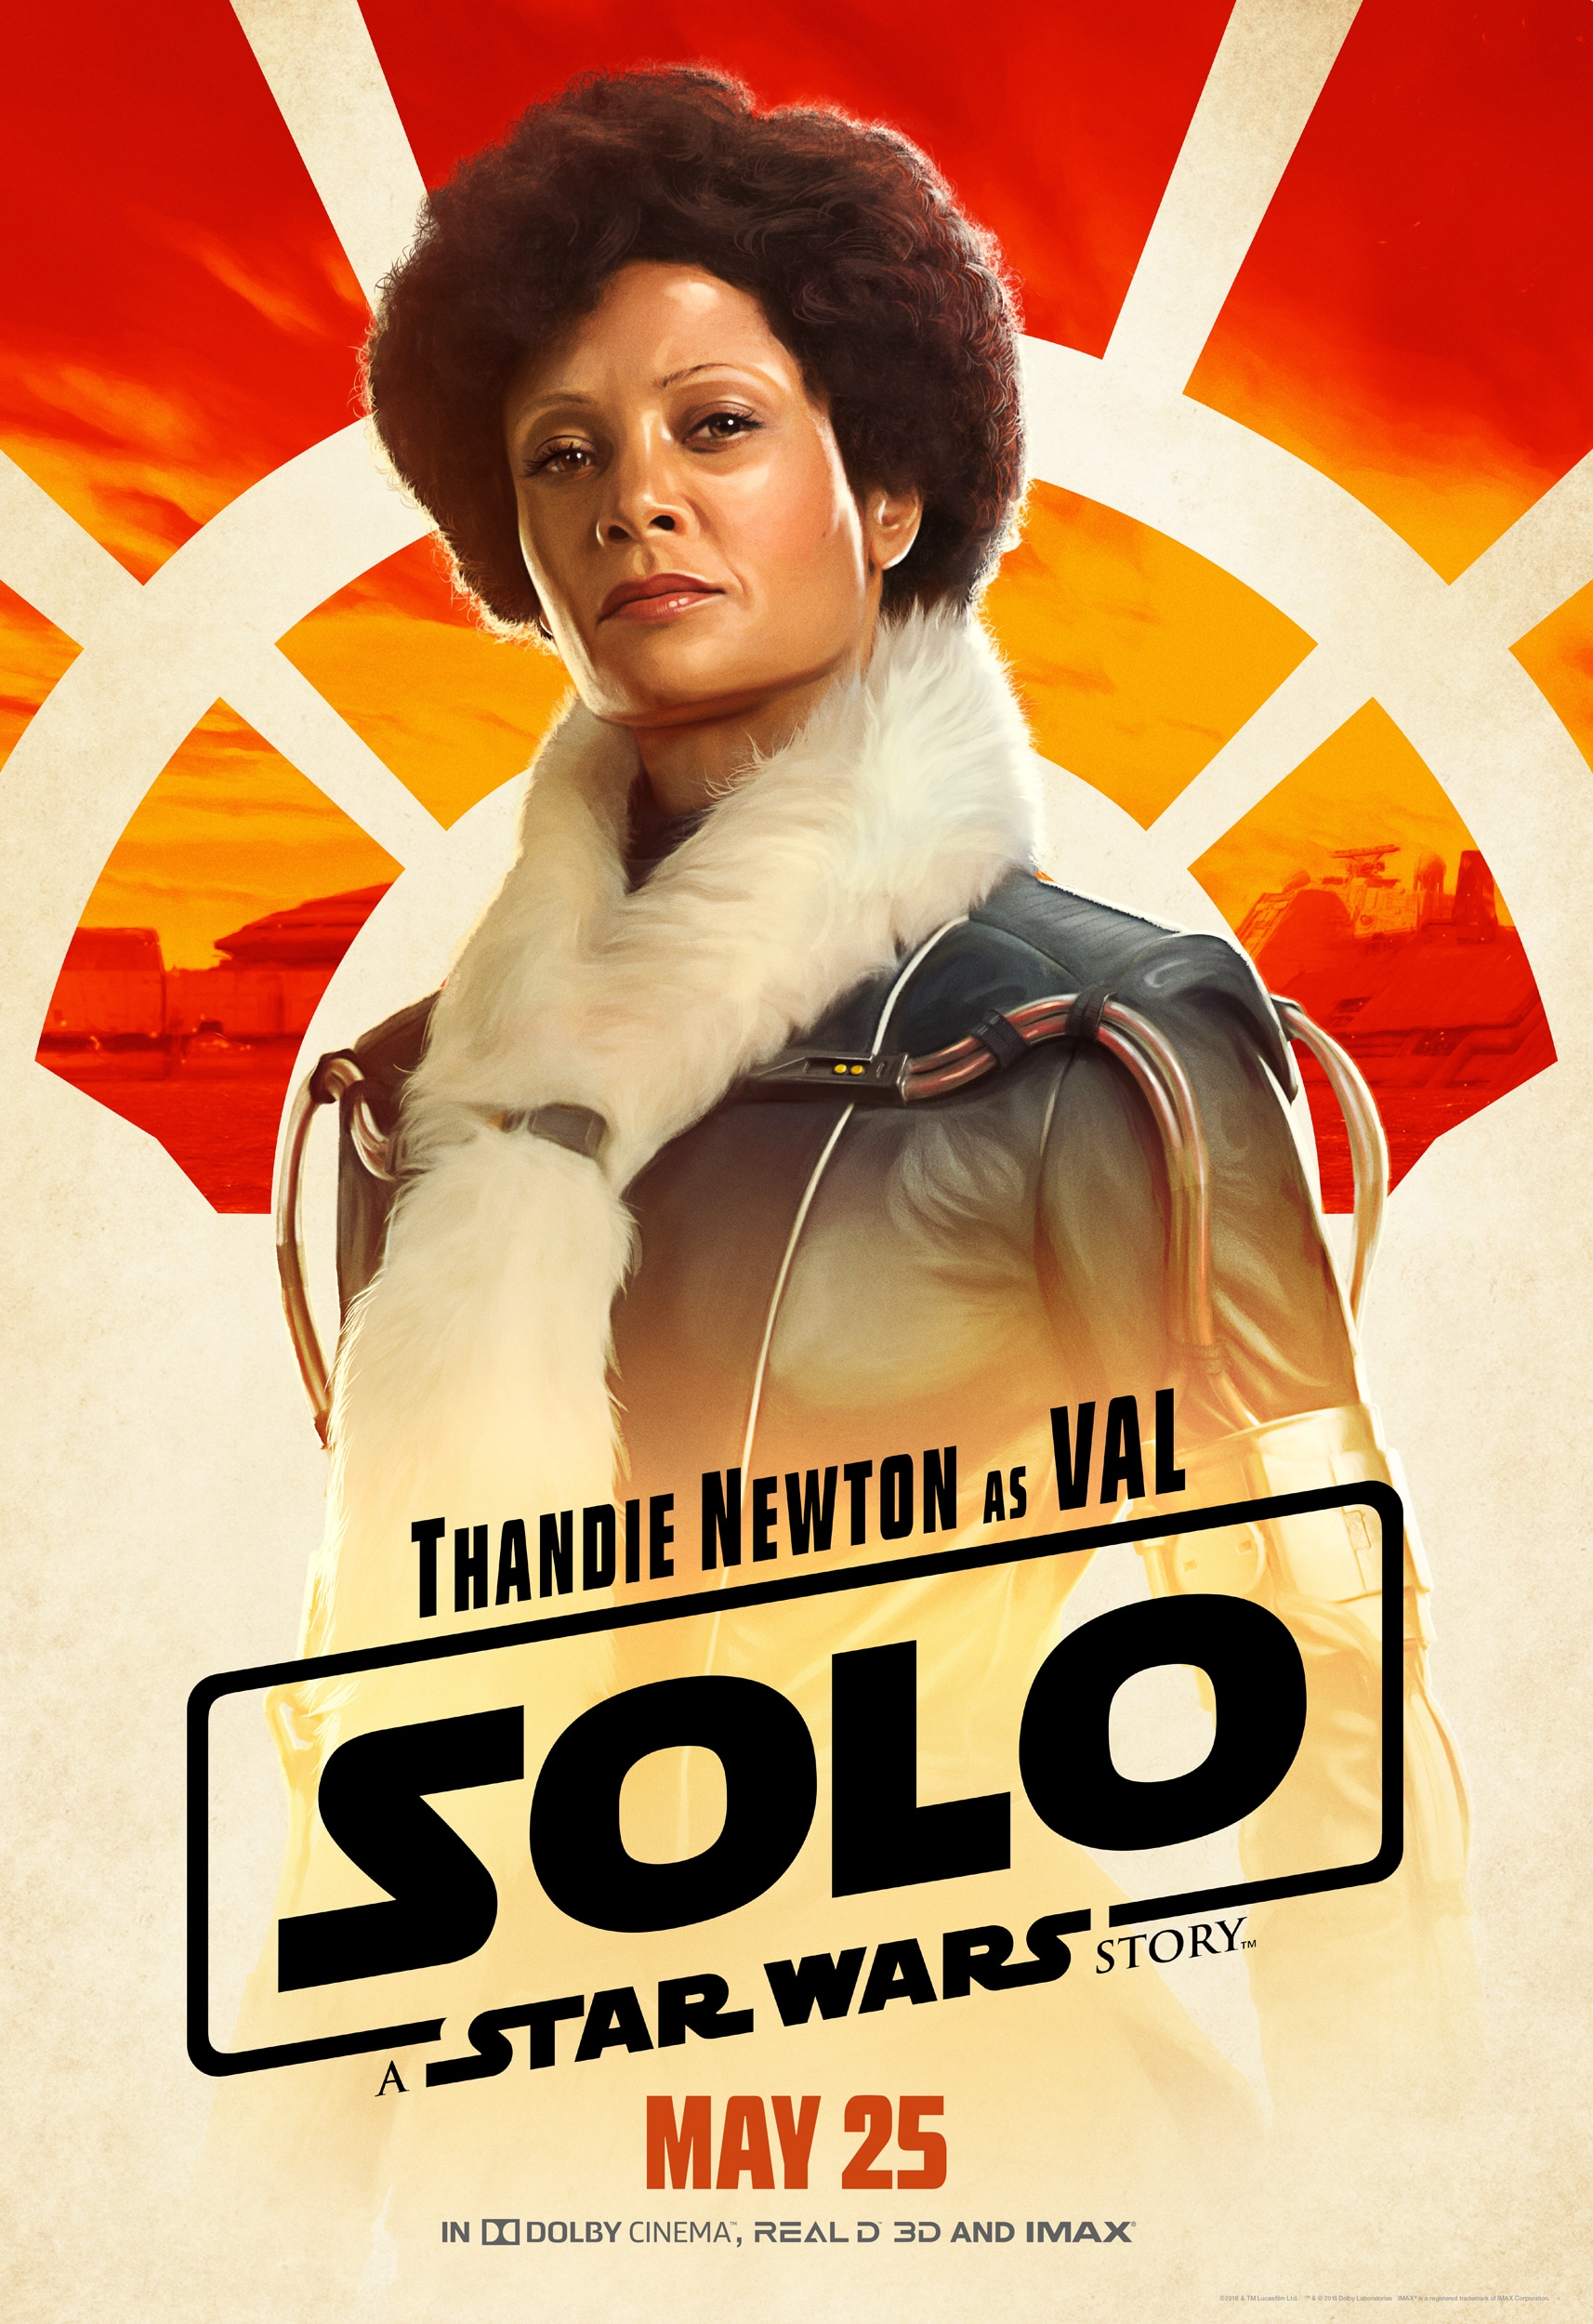 SOLO: A STAR WARS STORY Free Coloring Pages + Activity Sheets! #HanSoloEvent #HanSolo